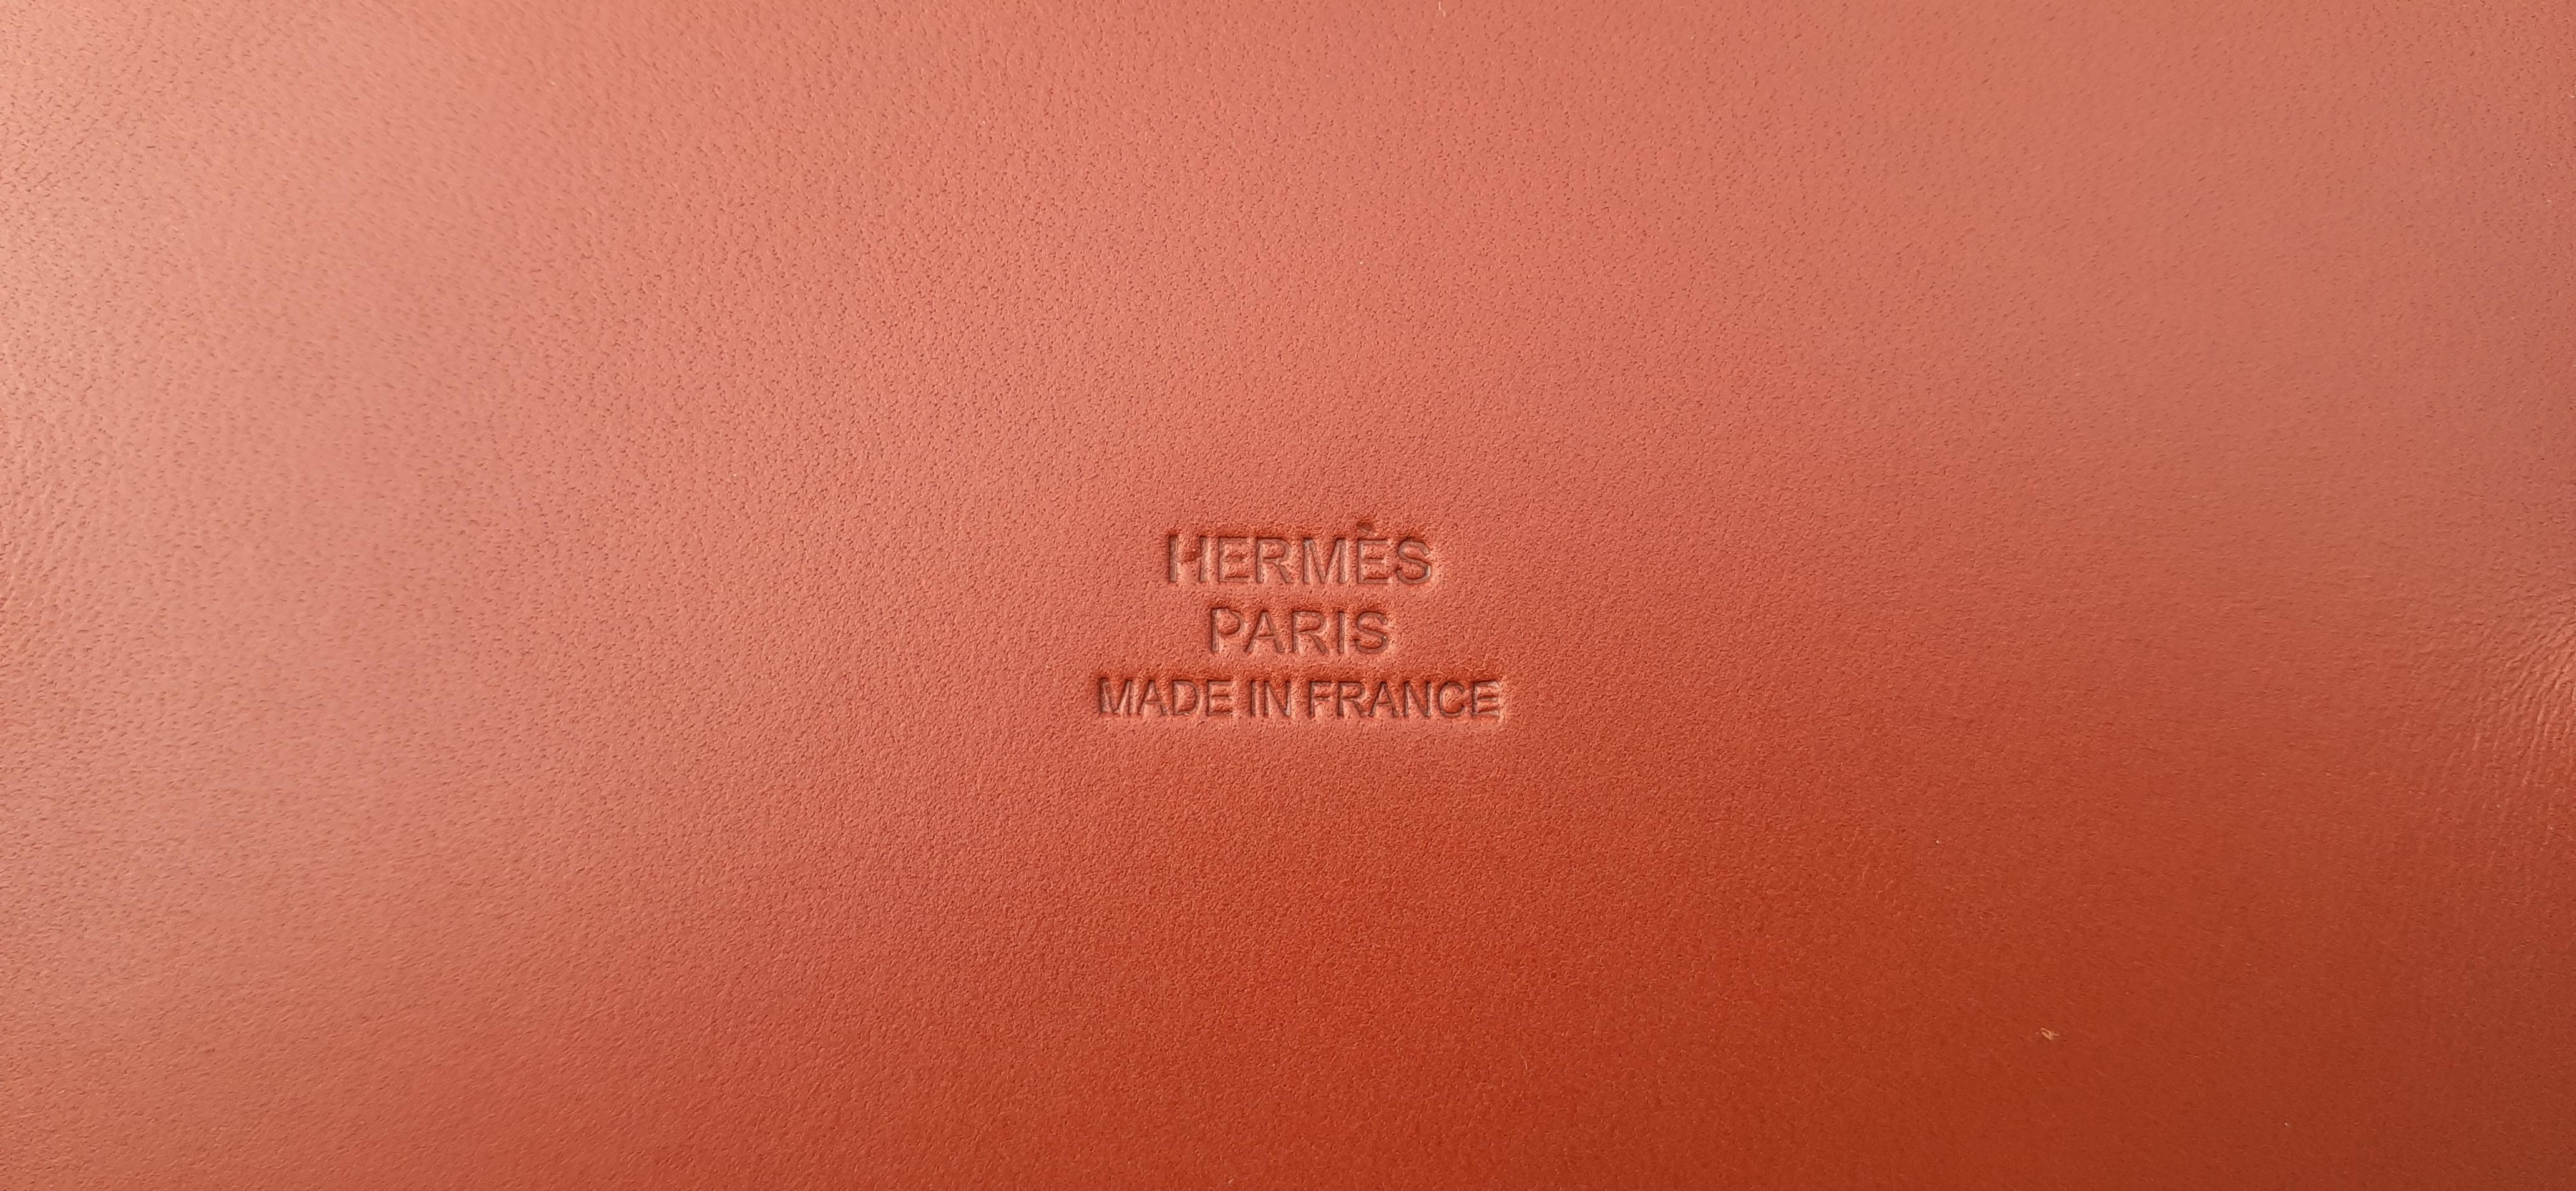 Height of elegance for this gorgeous authentic Hermès change tray

From the 